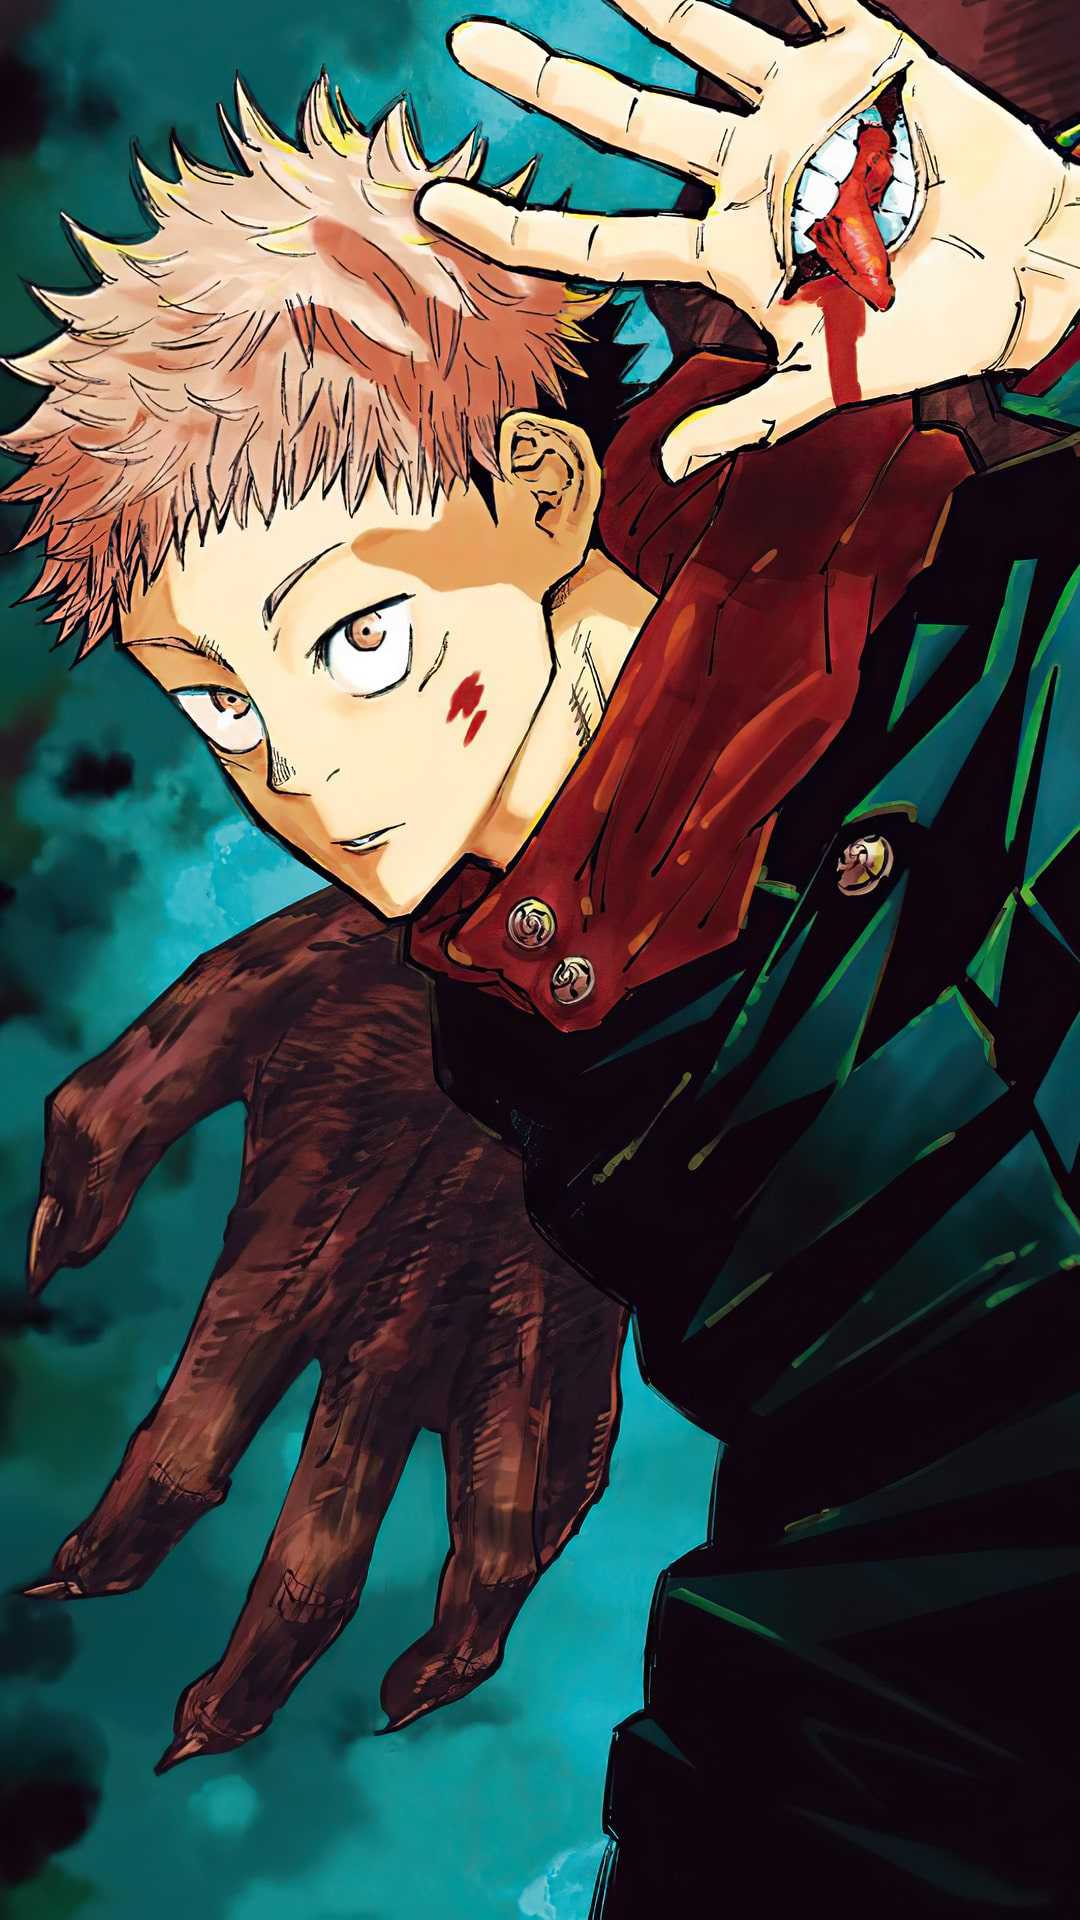 Jujutsu Kaisen Wallpaper iPhone 4K / Characters From Jujutsu Kaisen 2020 Anime Wallpaper 4k Ultra HD Id 6713 first chapter was published on march 2018 in issue 14 of weekly